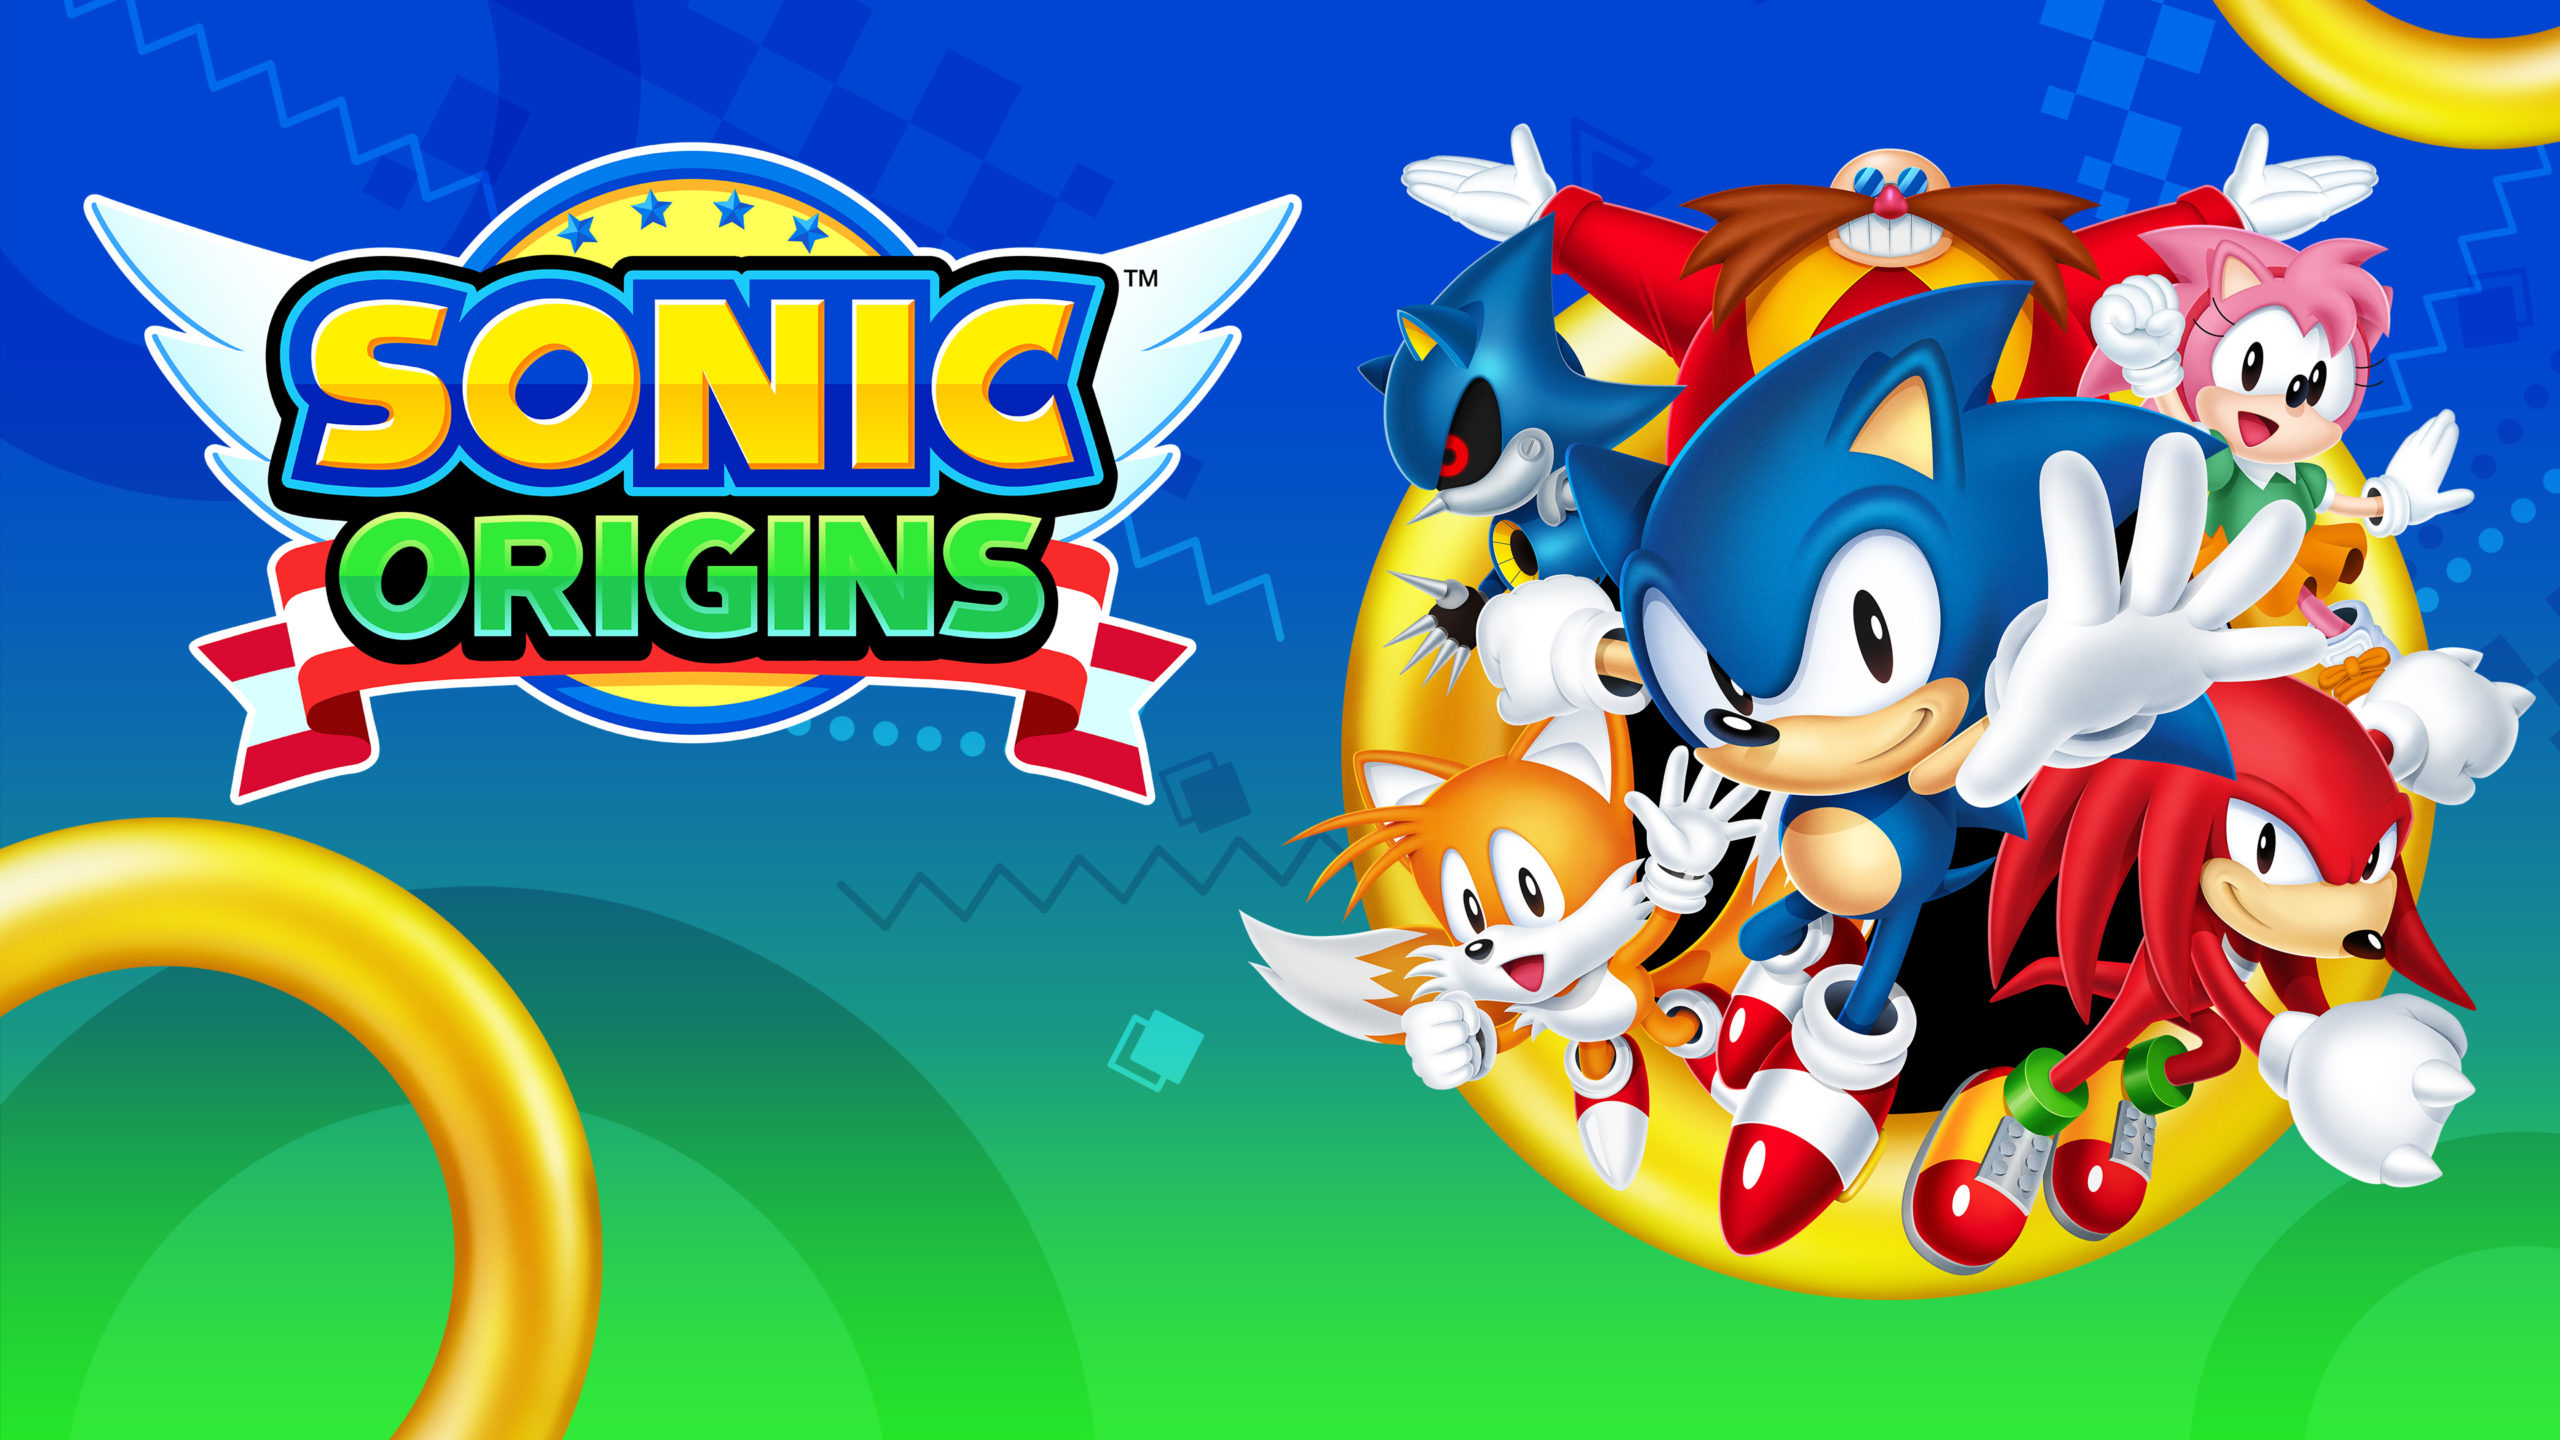 Sonic Origins remasters Sonic 1, 2, and 3 this summer